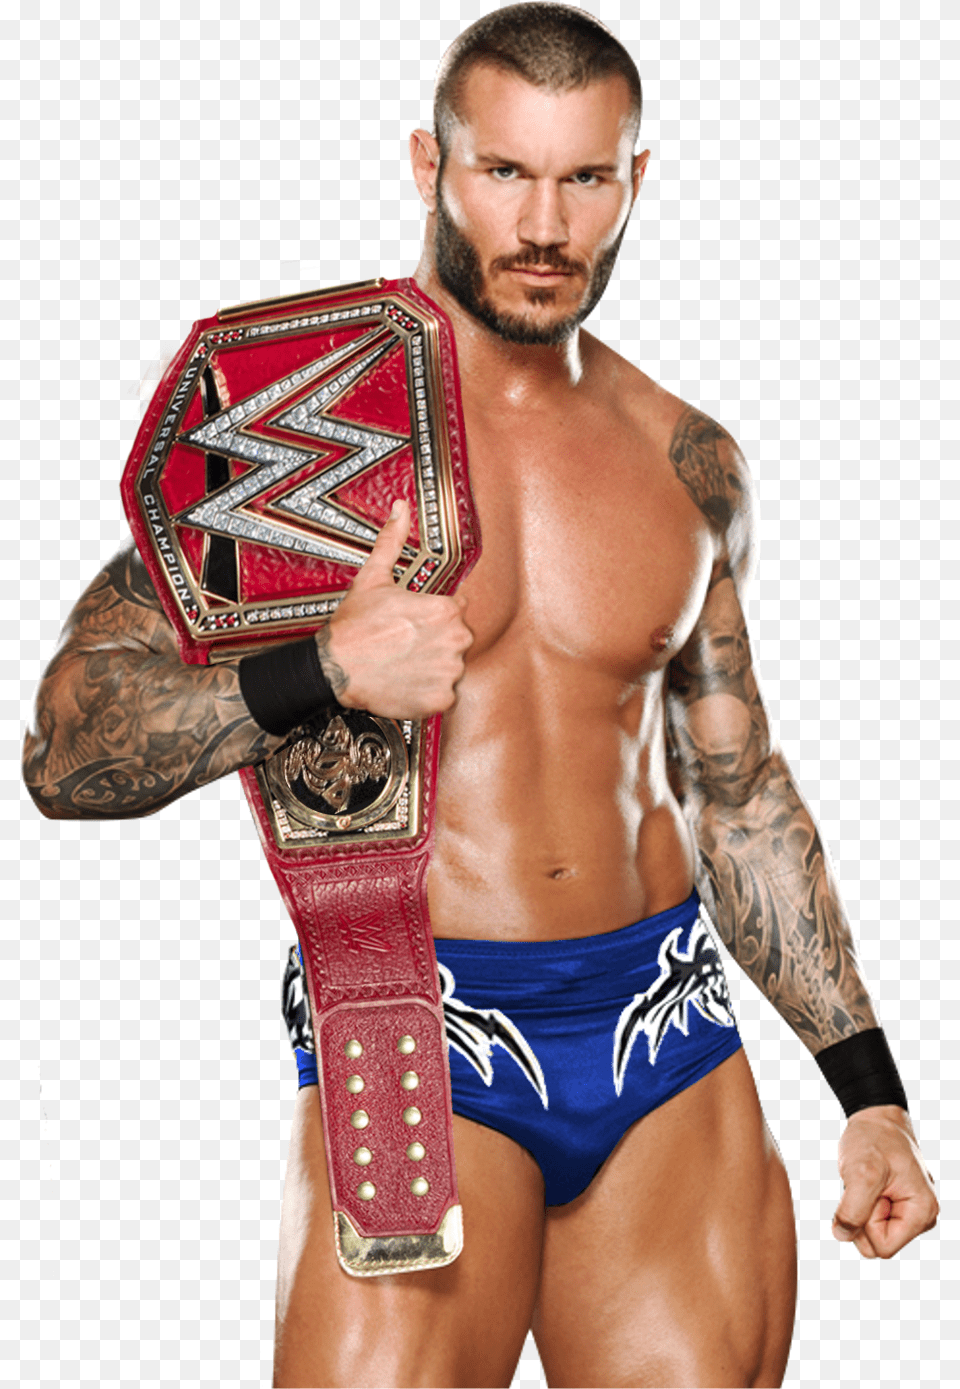 Randy Orton Wwe Universal Champion By Nibble Randy Orton Wwe Championship, Accessories, Person, Man, Male Free Transparent Png